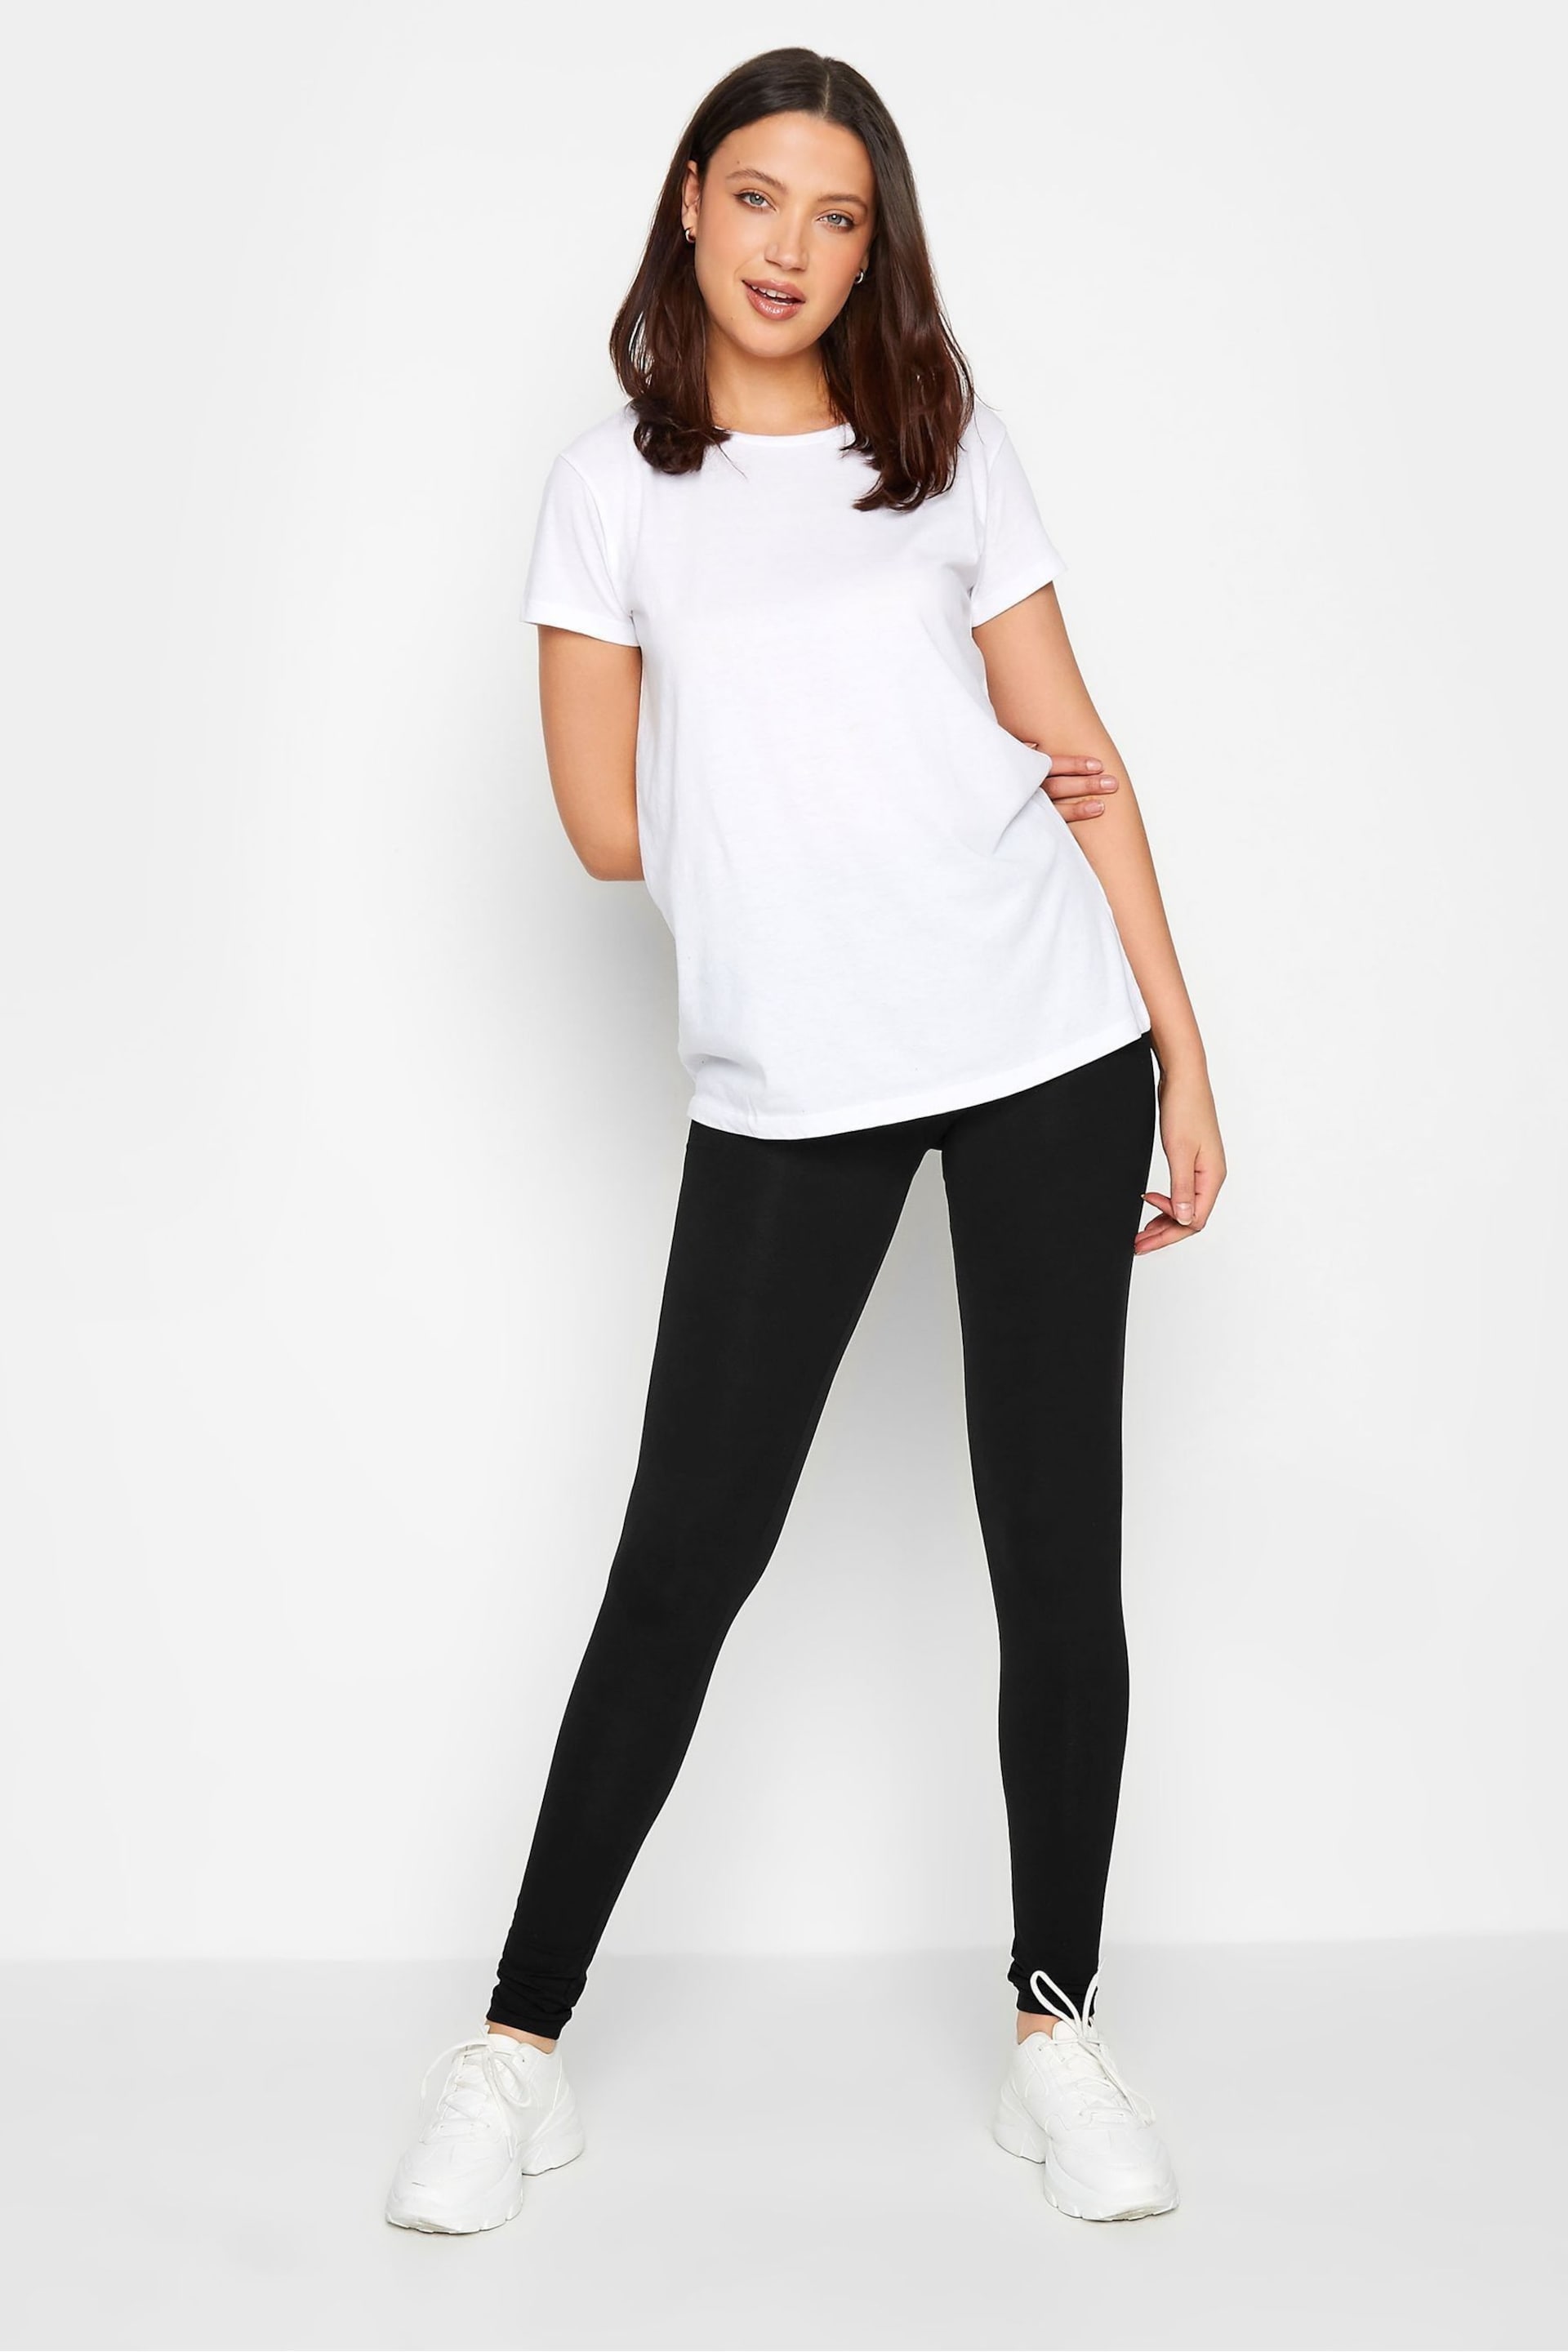 Long Tall Sally Black Stretch Cotton Leggings 2 Pack - Image 2 of 4